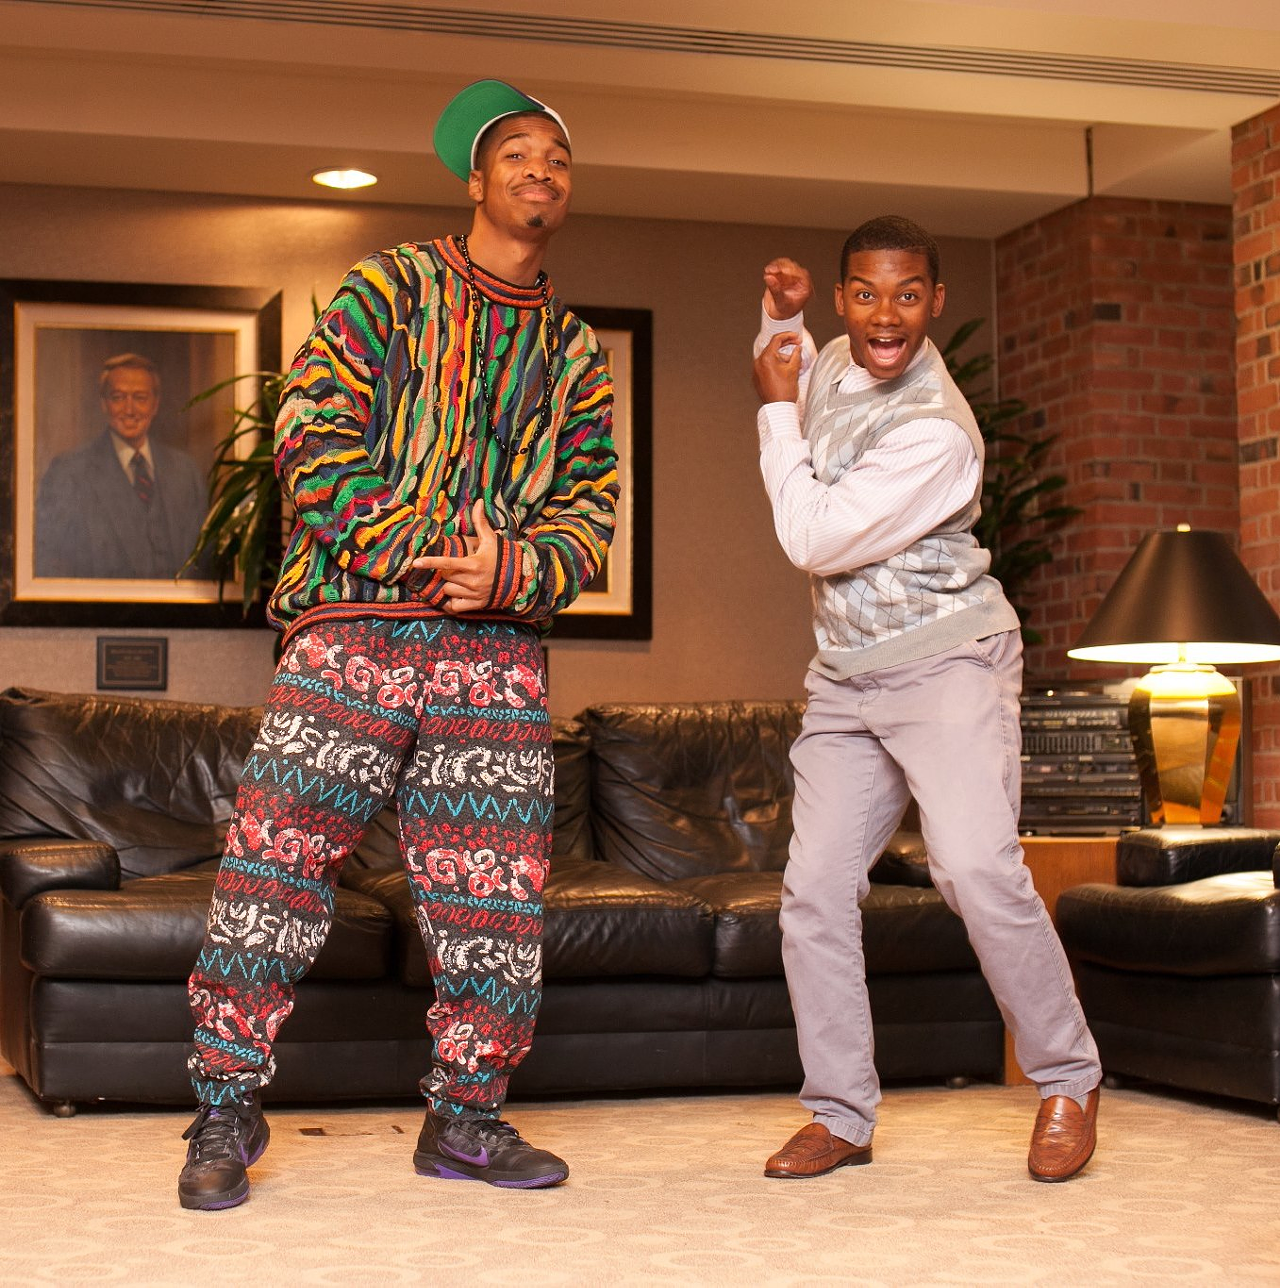 Now this is a story all about how two dudes dressed up as Will and Carlton from "Fresh Prince of Bel Air."